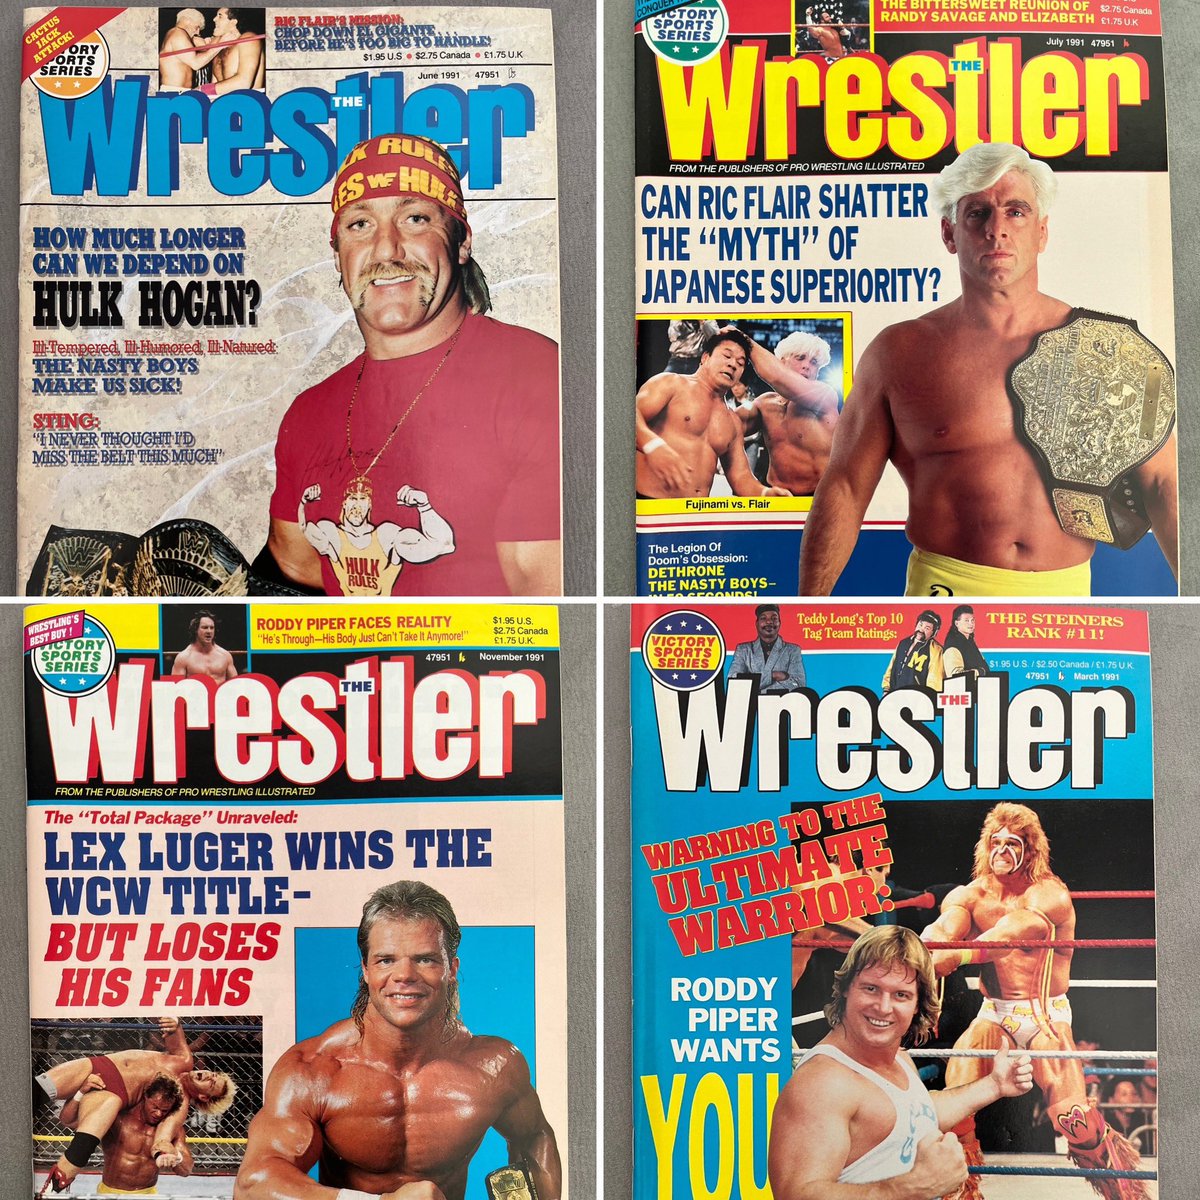 Get these classic back issues of The Wrestler magazine from 1991 and more. Website in bio. #insidewrestling #wrestling #wwe #vintage #wcw #wwf #wrestlingmagazines #oldschoolwrestling #oldschoolwrestlingmagazines #90swrestling #hulkhogan #ricflair #lexluger #ultimatewarrior #piper